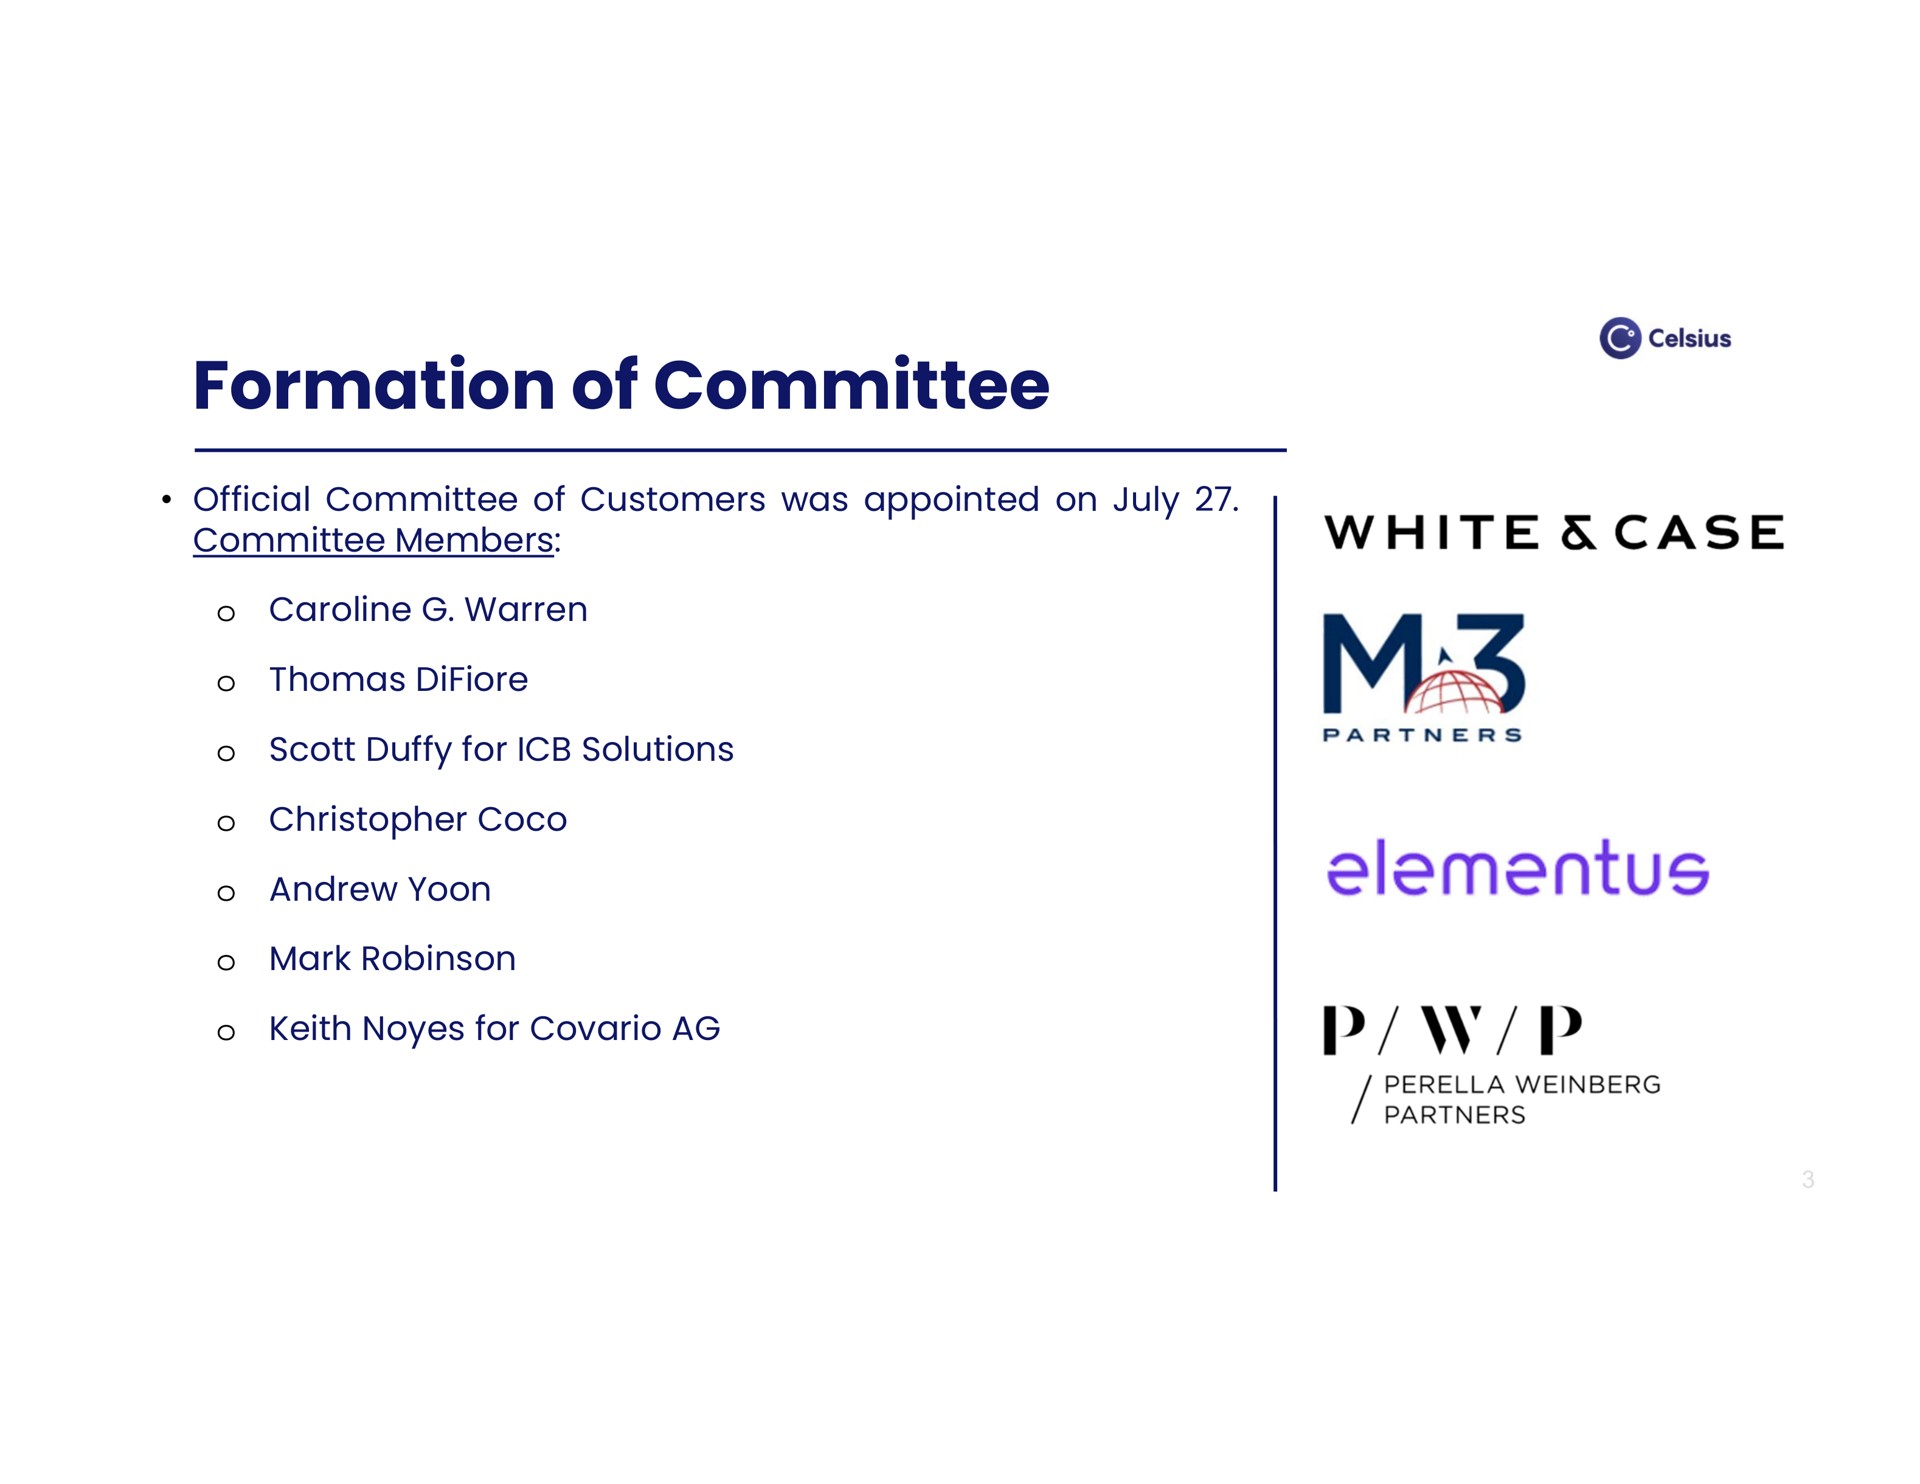 formation of committee white case | Celsius Holdings